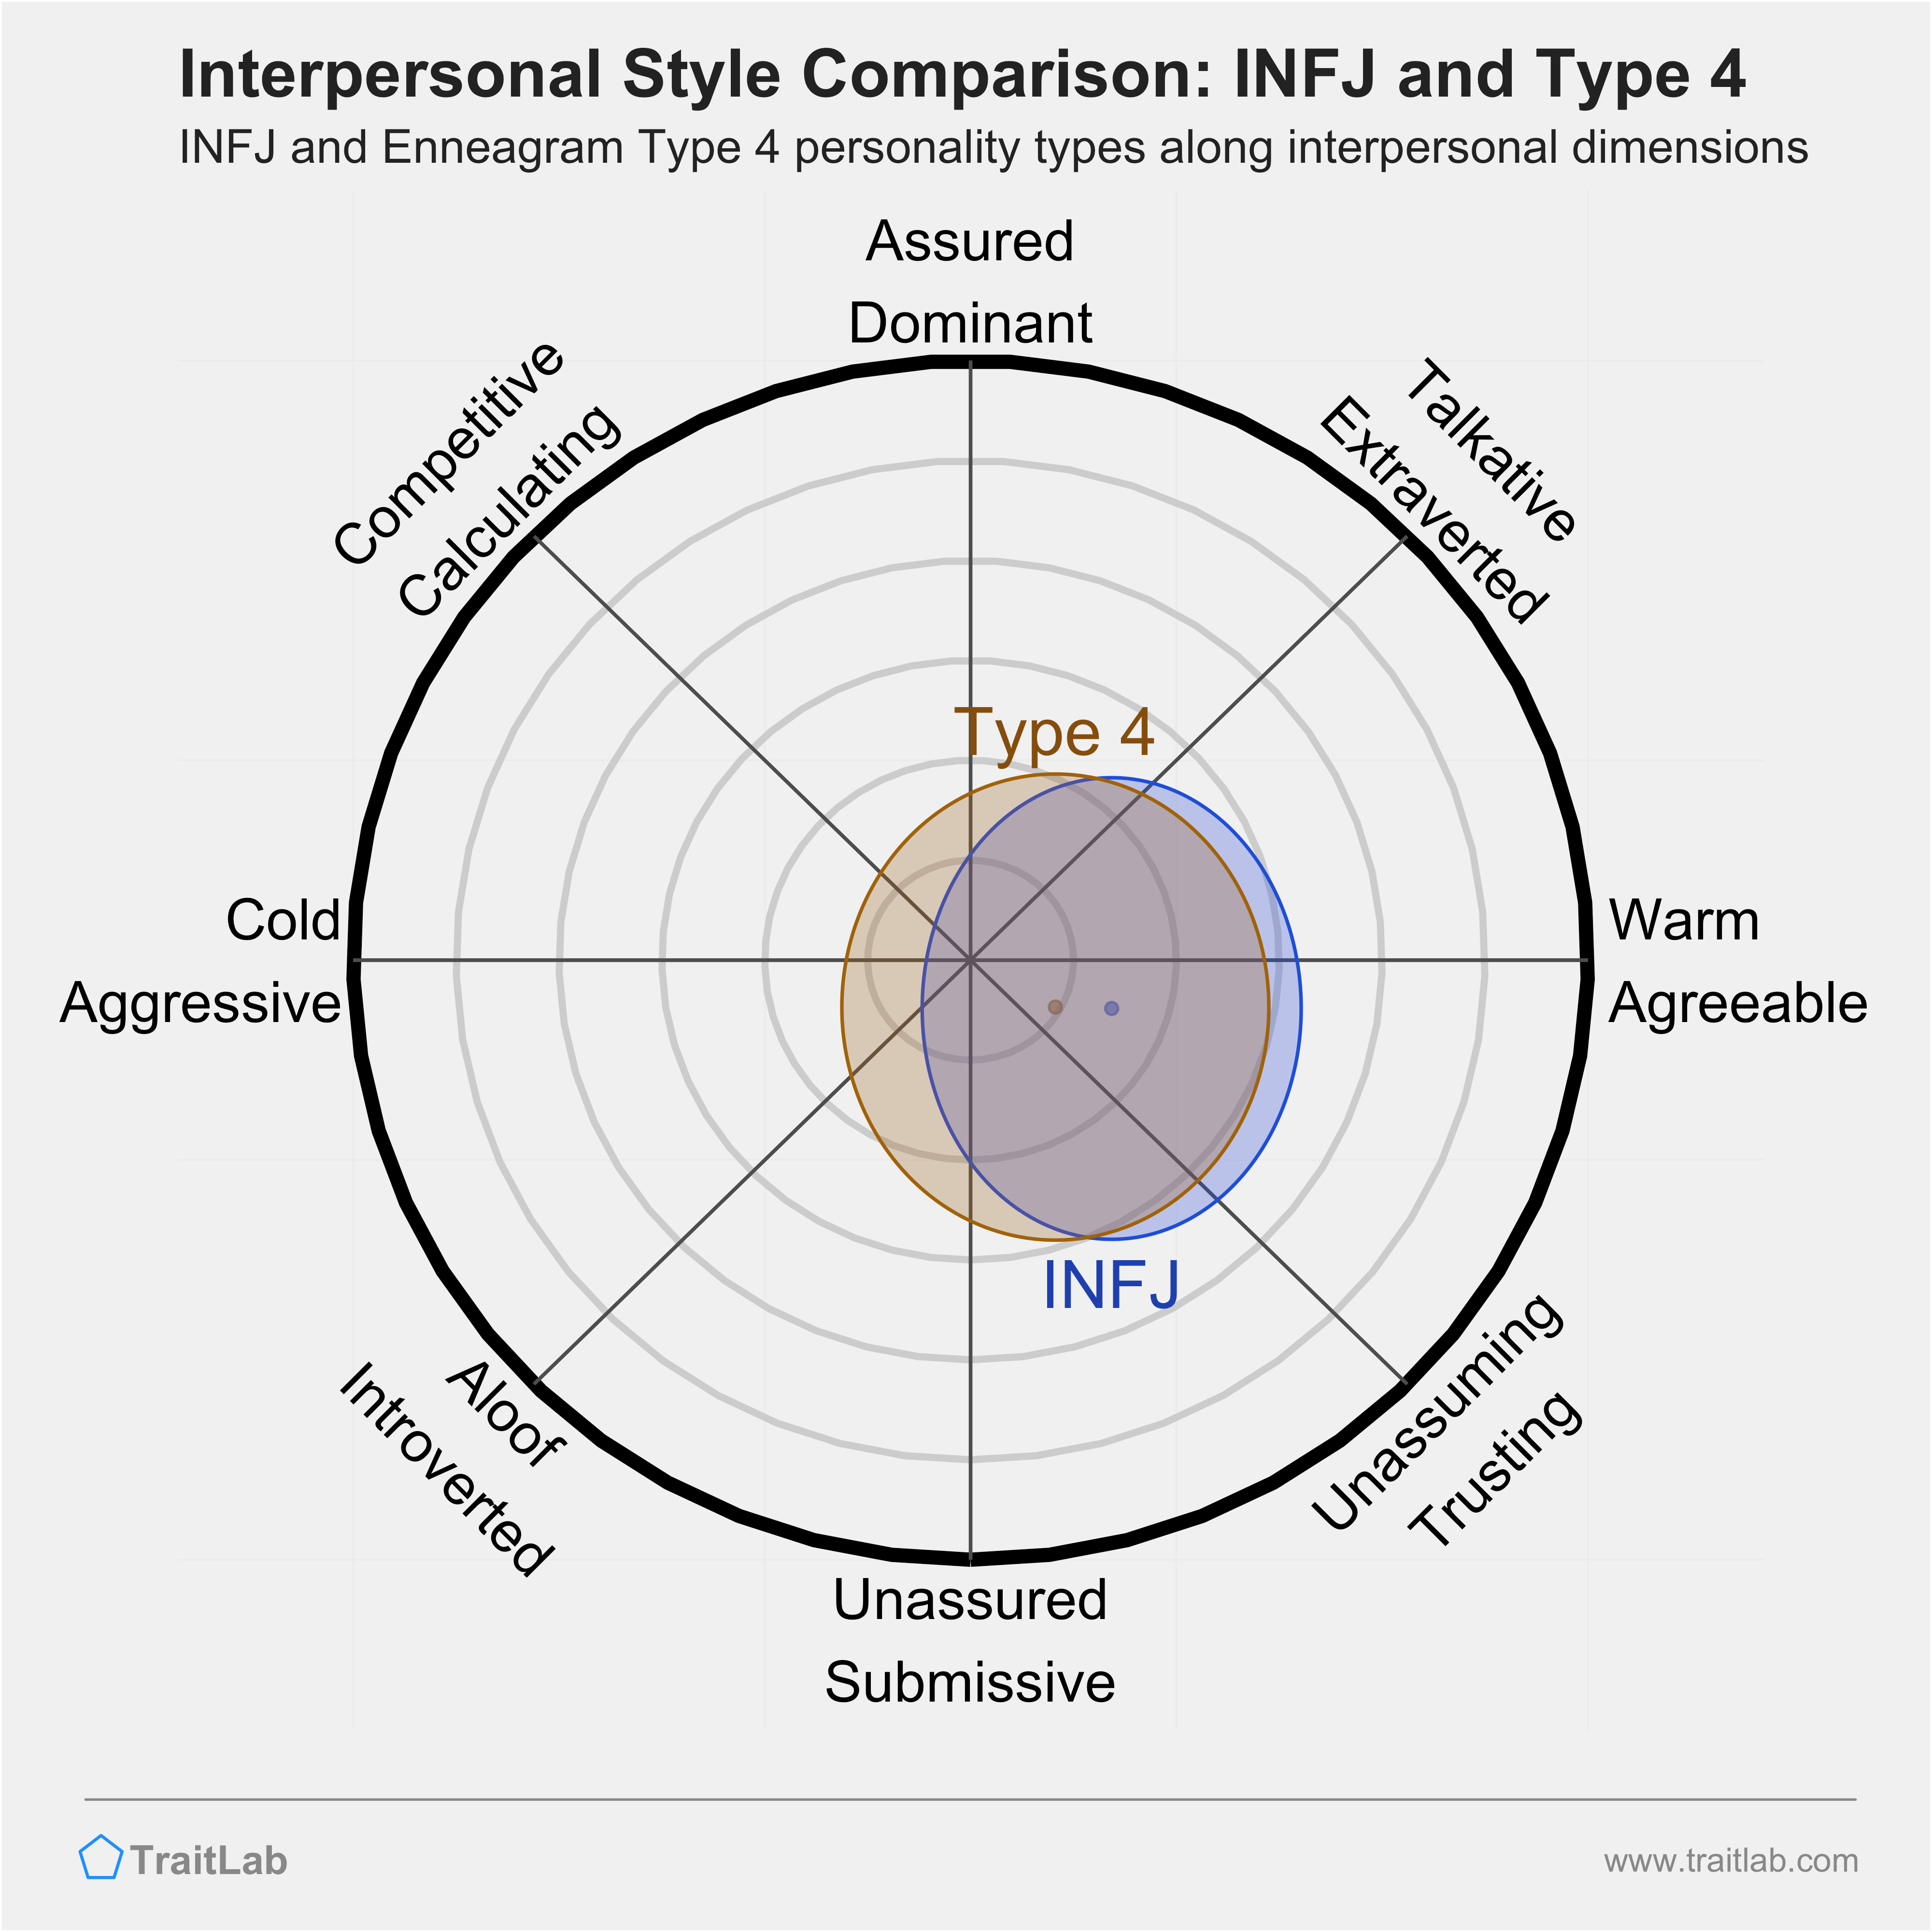 Enneagram INFJ and Type 4 comparison across interpersonal dimensions